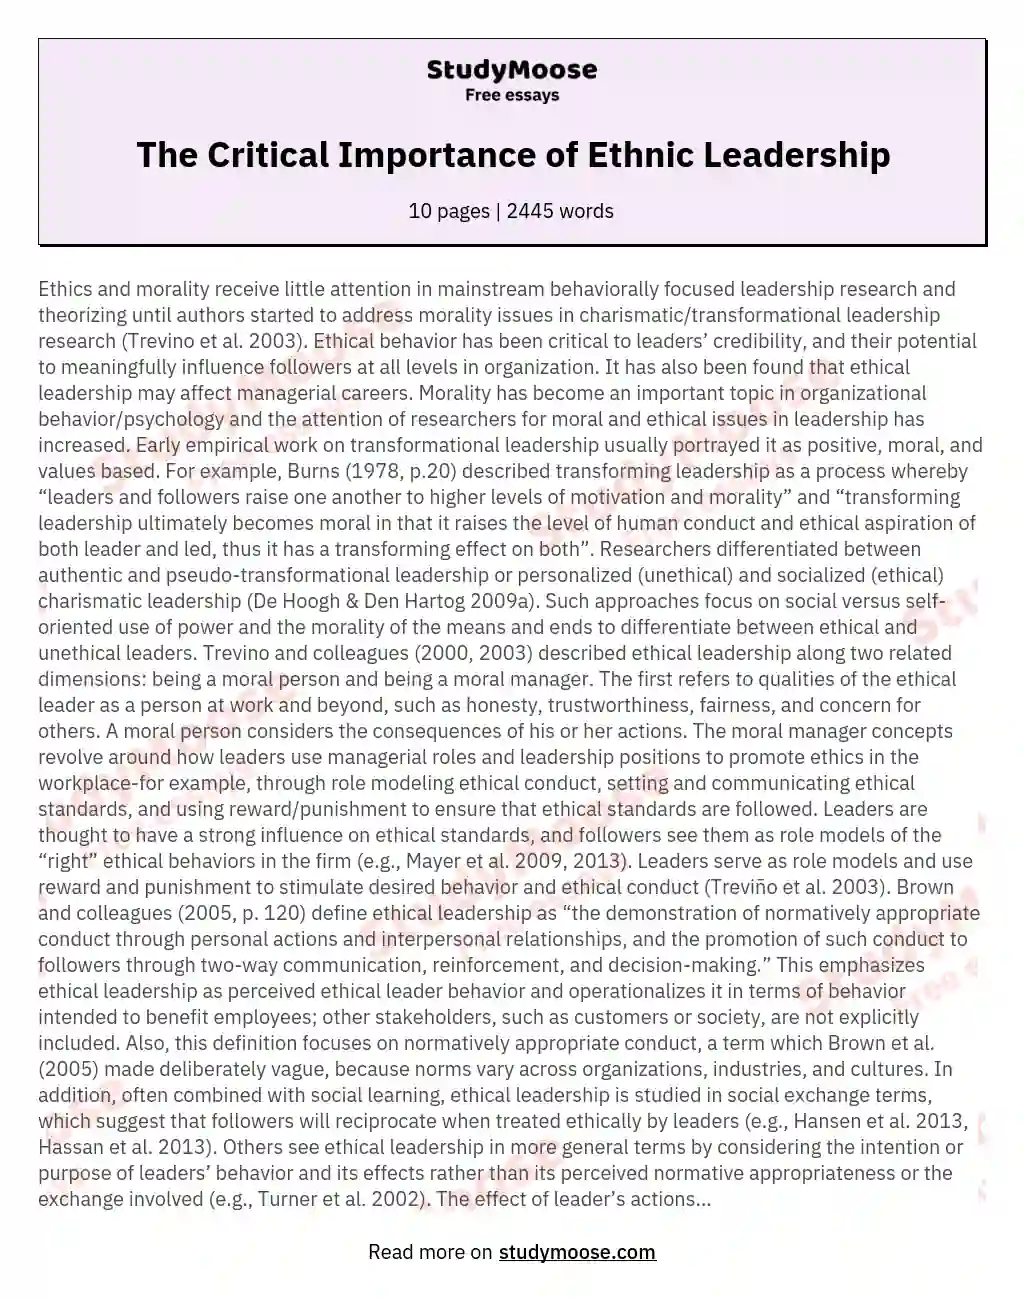 The Critical Importance of Ethnic Leadership essay